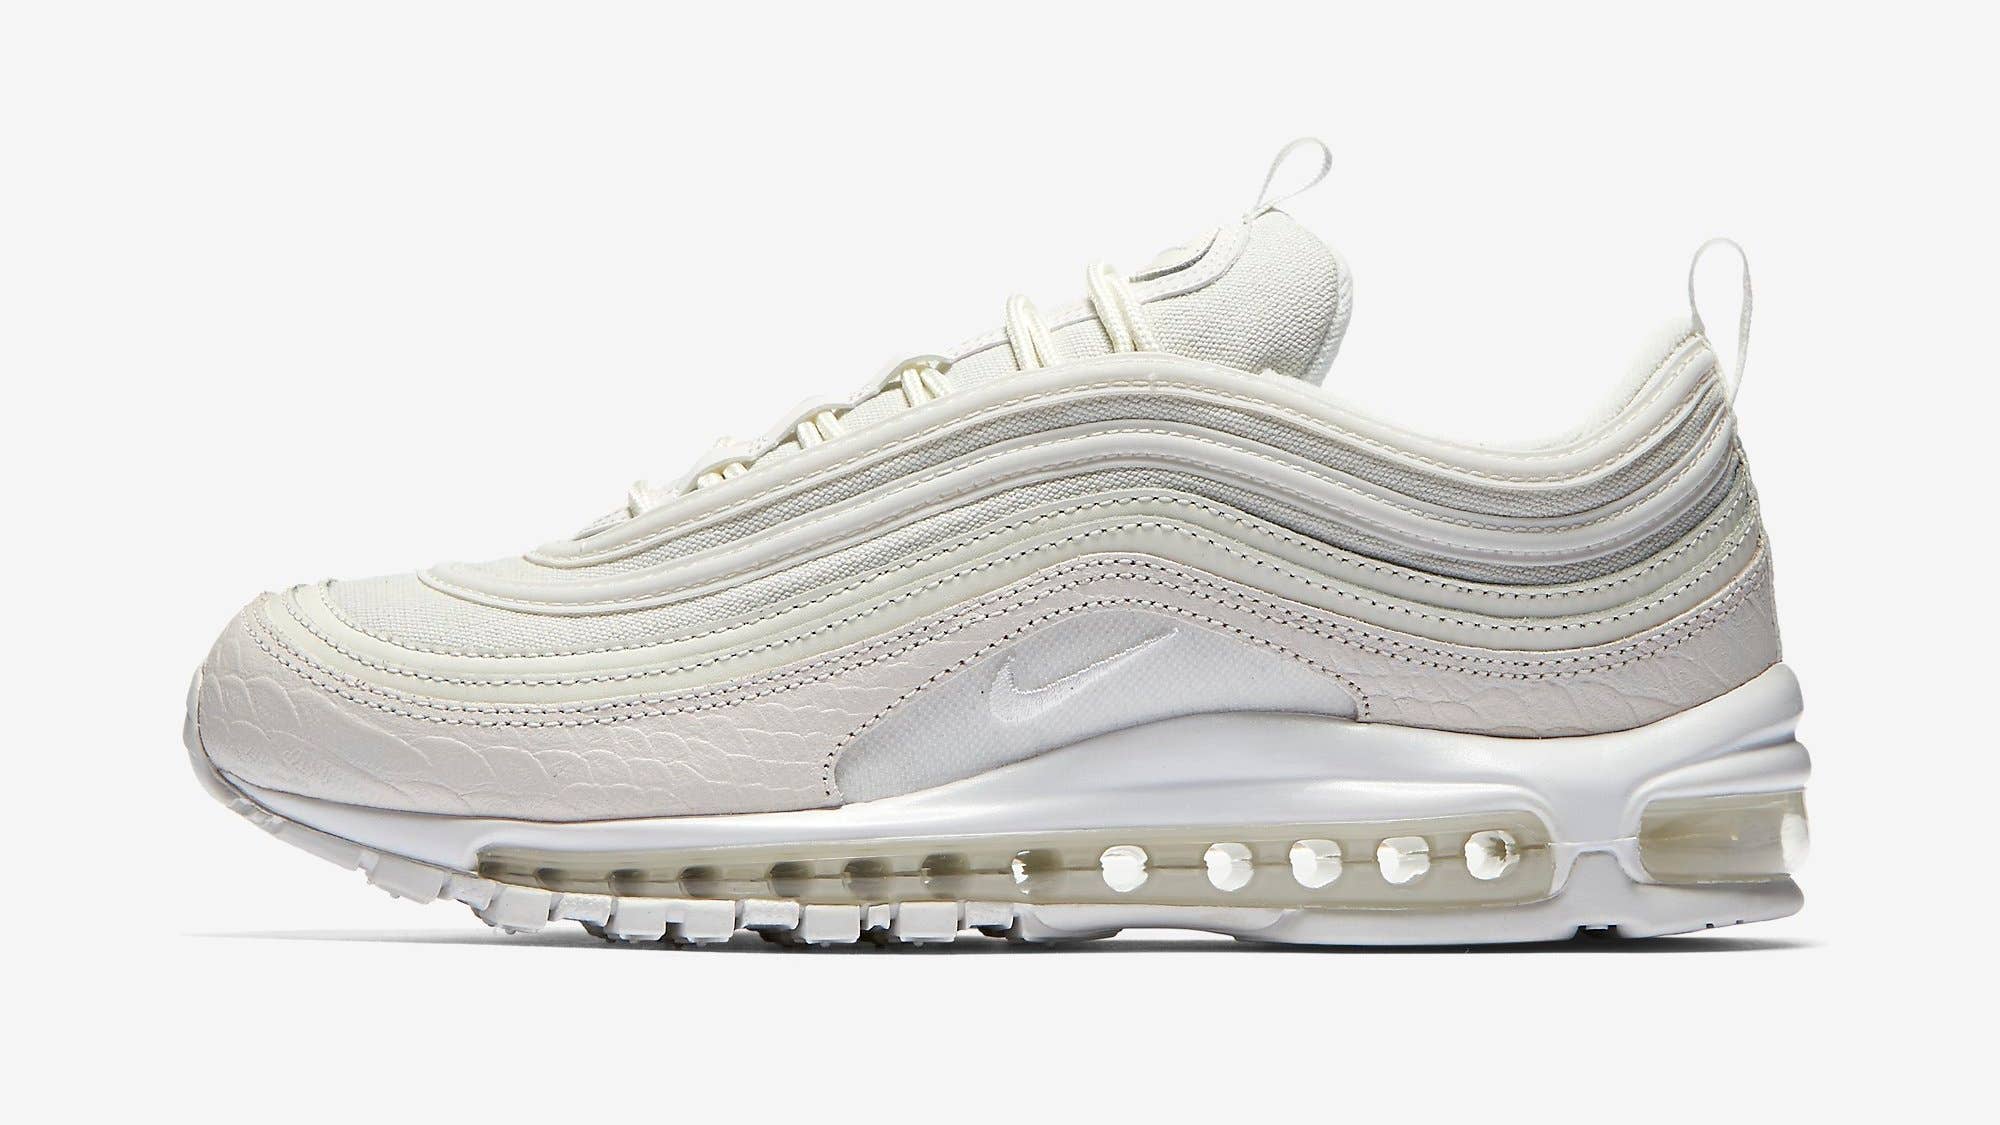 Componeren Ass Vereniging White Snakeskin' Nike Air Max 97s Are Releasing | Complex